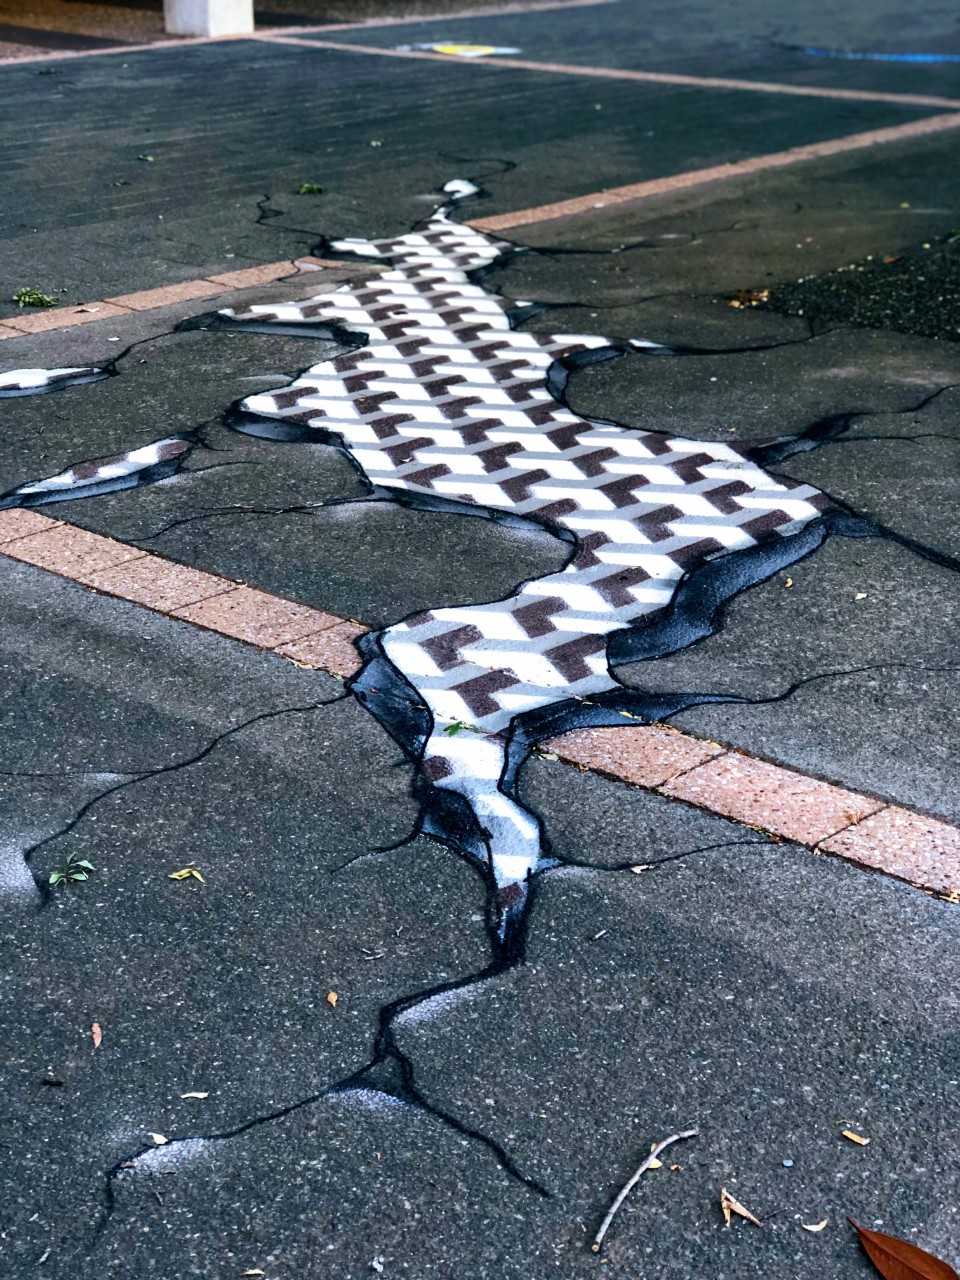 Black and white chalk art resembling tiles showing through a crack in the ground.